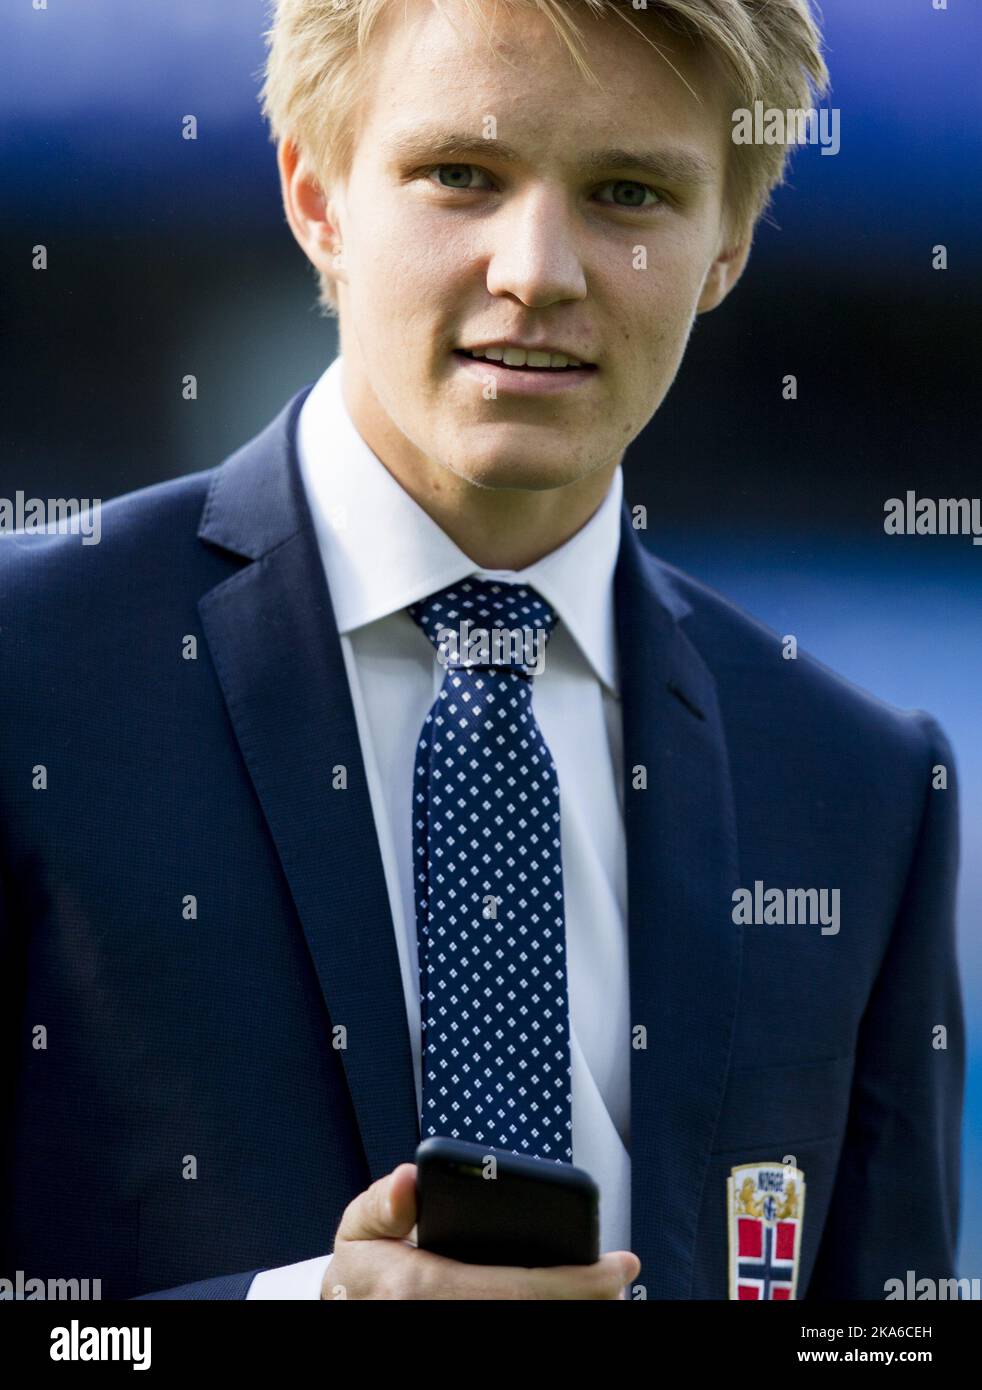 Oslo, Norway 20150608. Soccerplayer Martin Oedegaard before private footbal lmatch between Norway and Sweden at Ullevaal Stadium on Monday night. Photo: Vegard Wivestad Groett / NTB scanpix Stock Photo